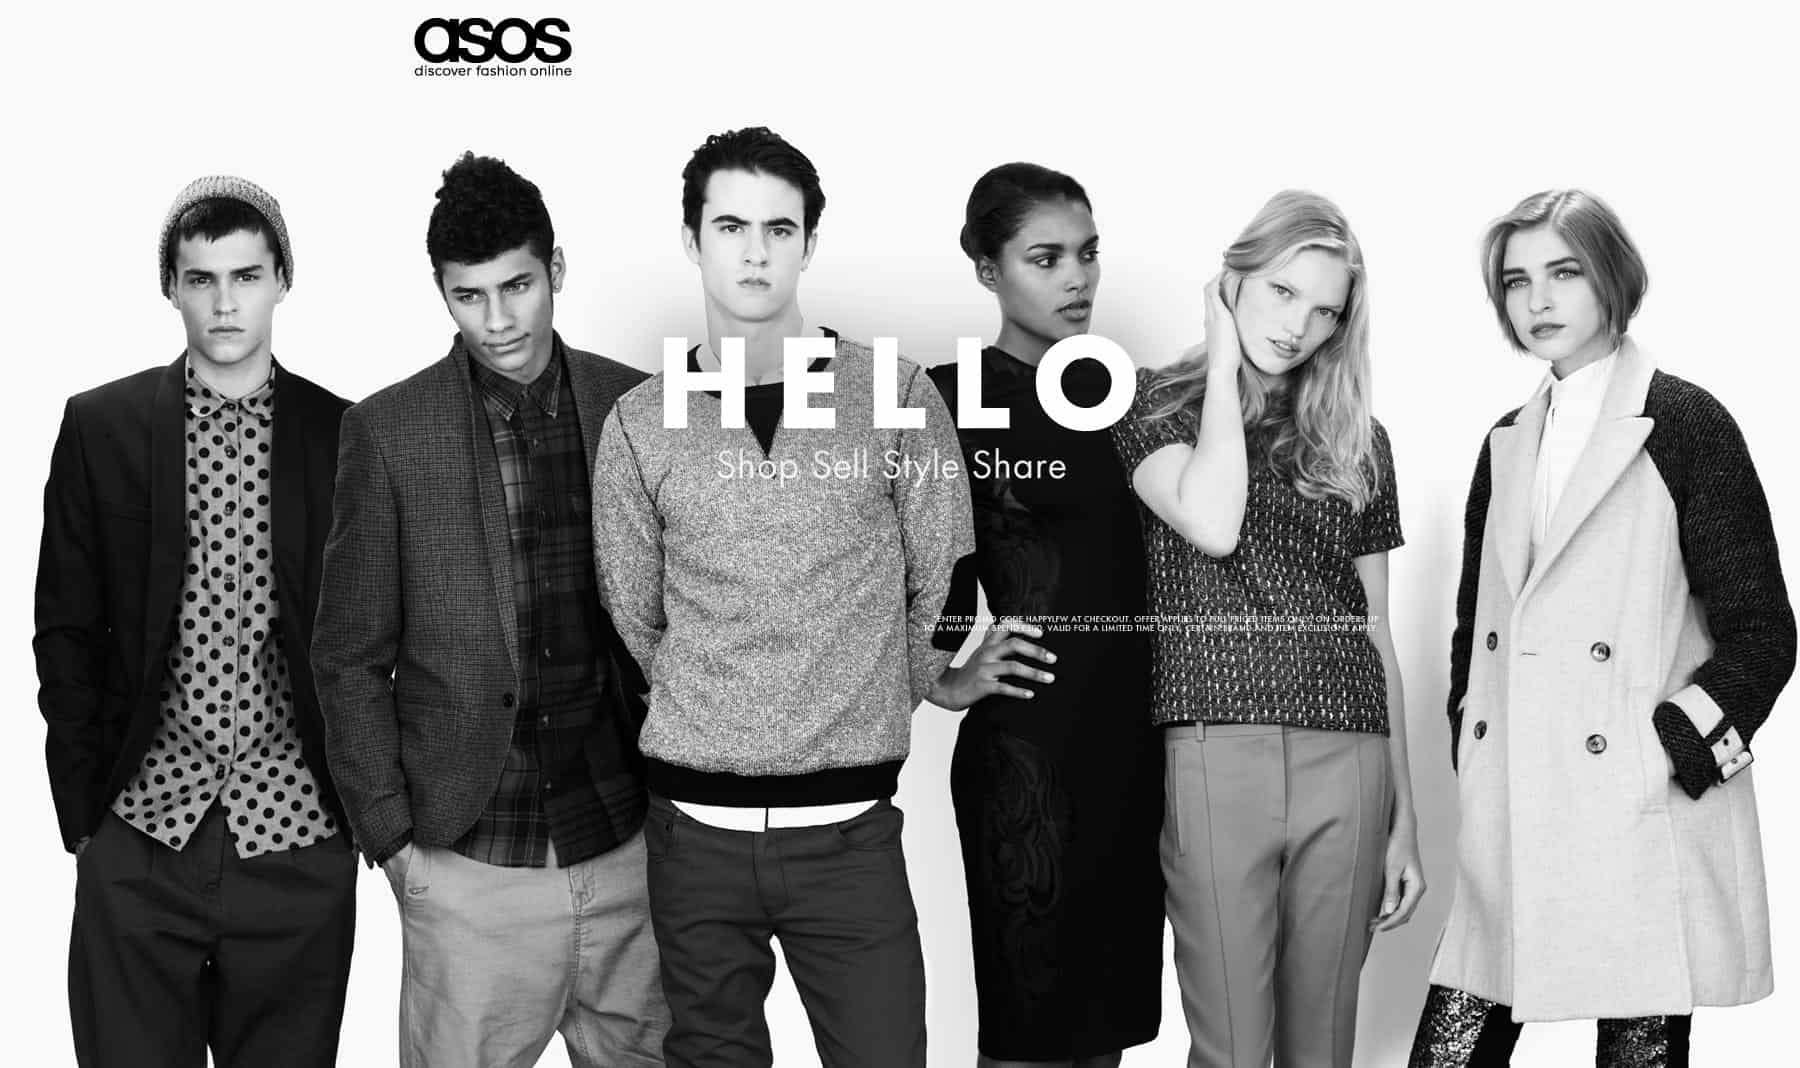 ASOS continues on its growth trajectory